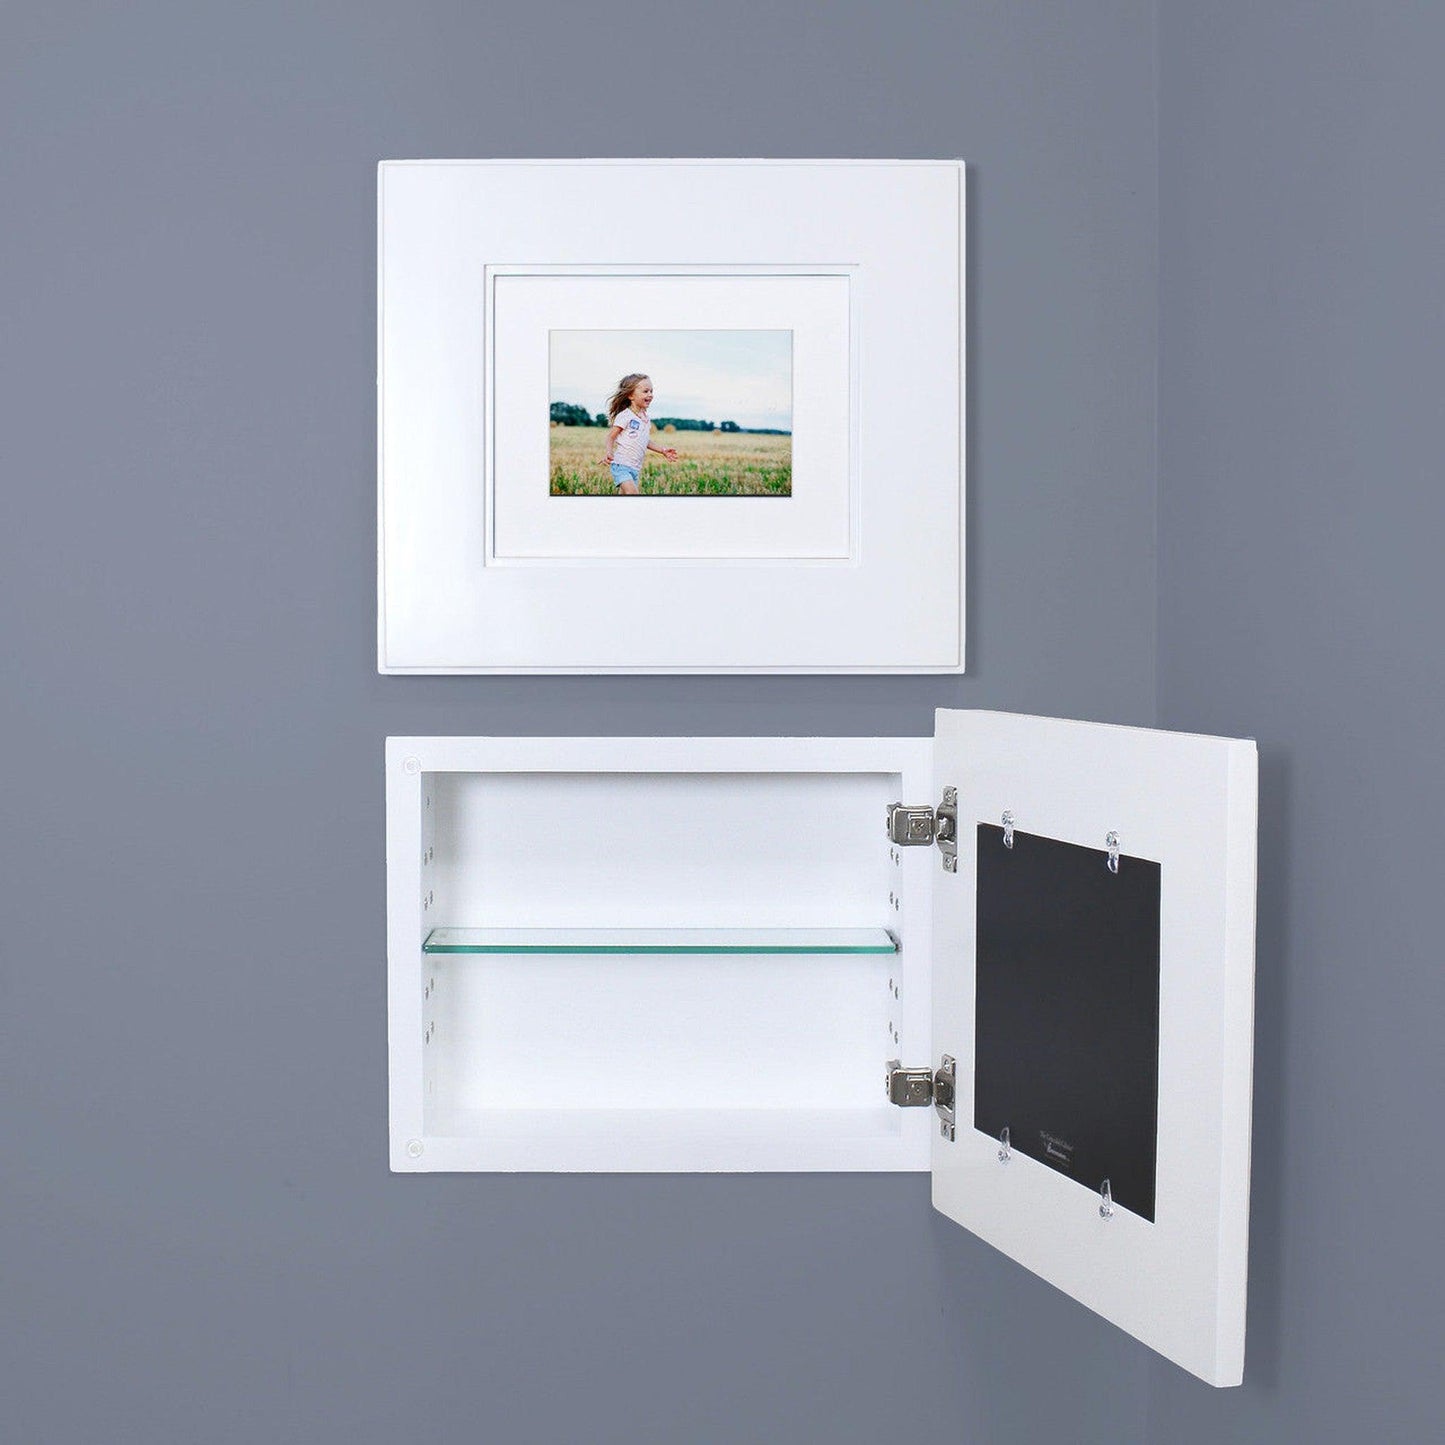 Fox Hollow Furnishings 14" x 11" White Compact Landscape Shaker Special 6" Depth Recessed Picture Frame Medicine Cabinet With Mirror and Ivory Matting